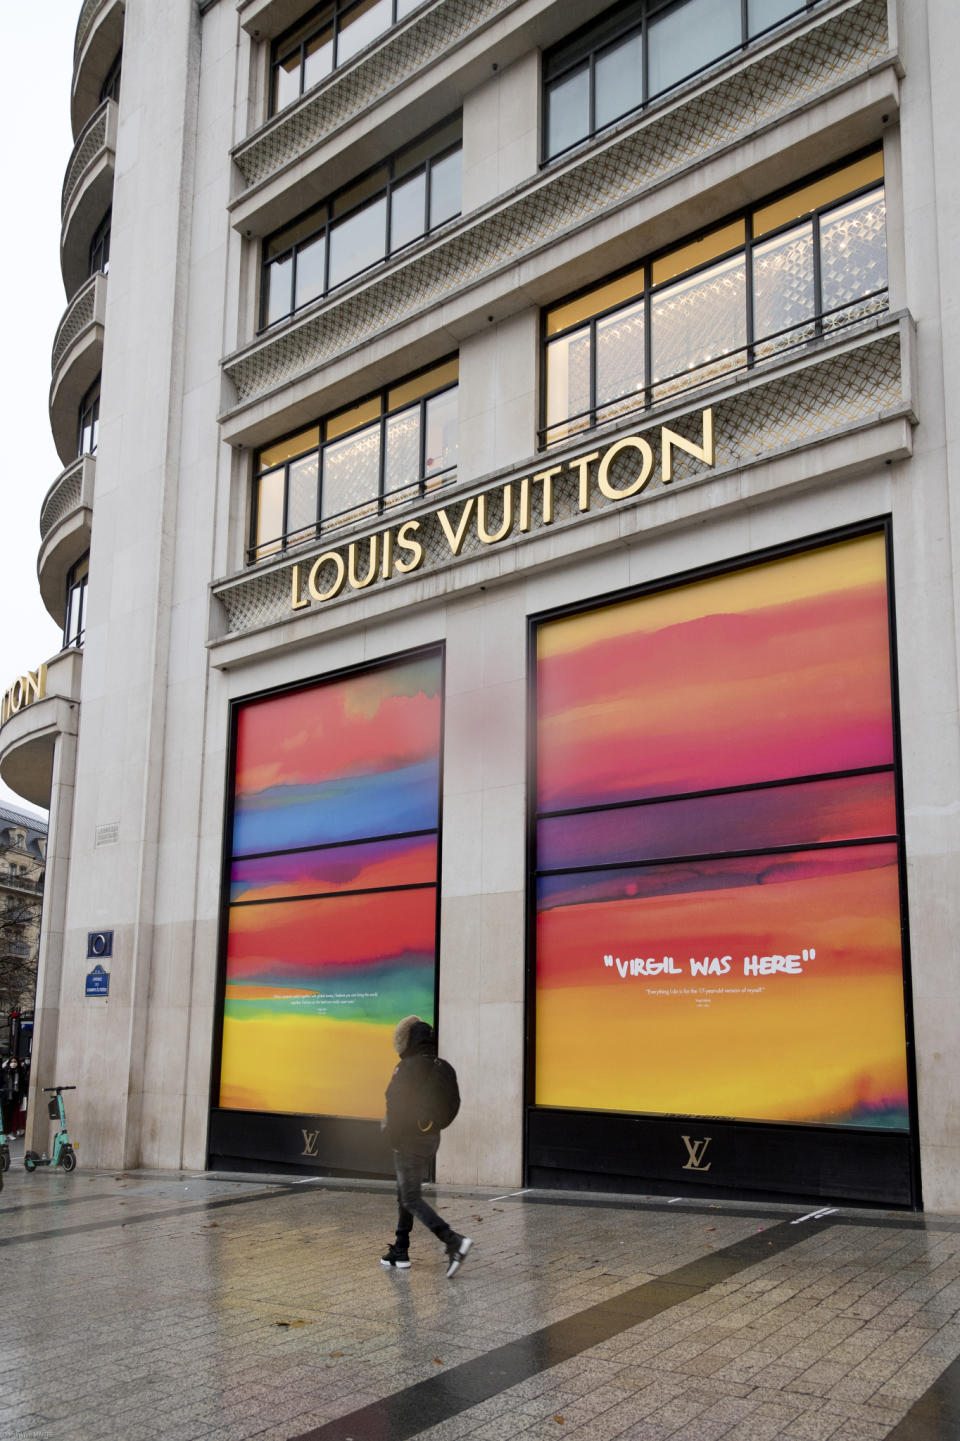 Louis Vuitton Flagship in Paris with the windows “Tribute to Virgil Abloh”